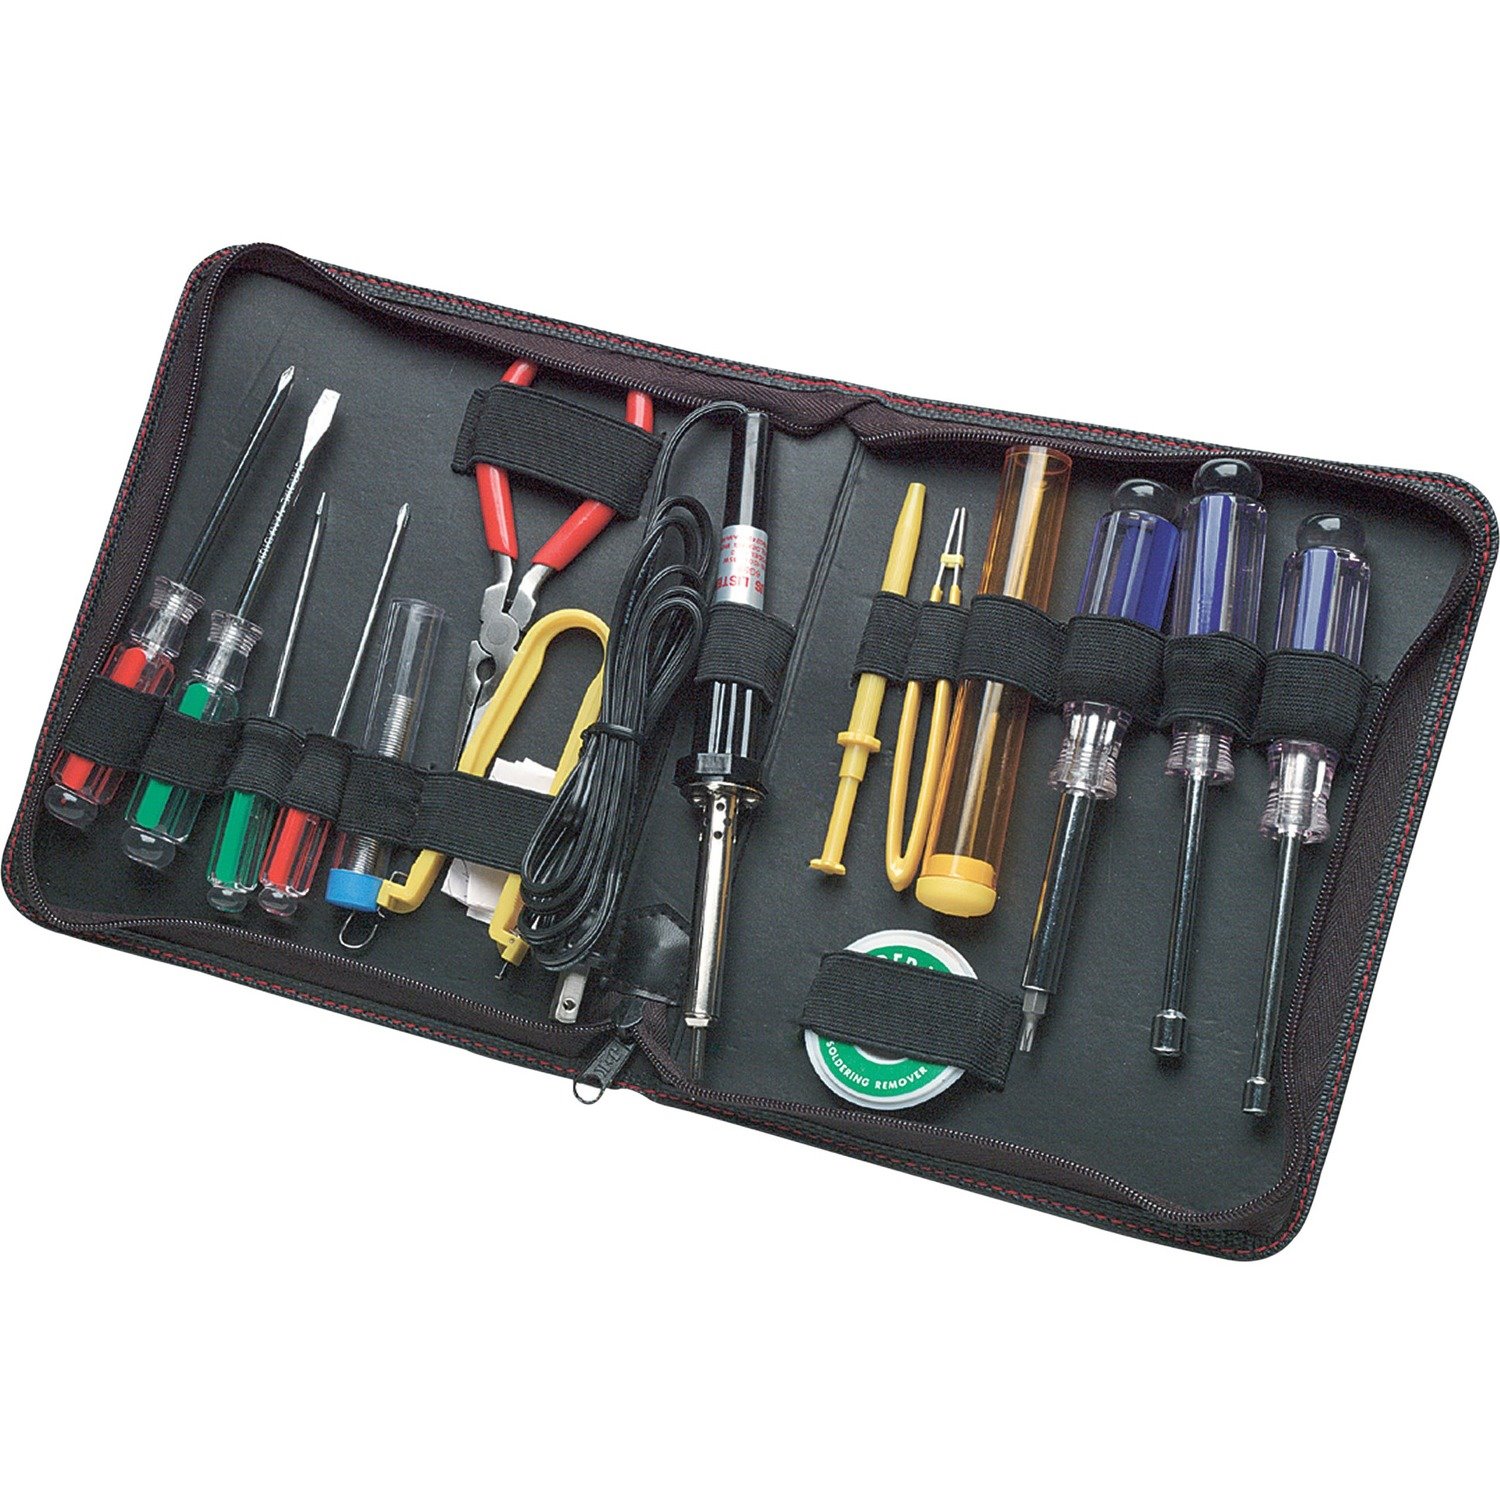 Manhattan Technician Tool Kit (17 items), Consists of: Soldering Iron (Euro 2-pin plug), Solder and Wick, 4x Chip Tools (Anti Static), Pliers, 2x Nut-Drivers, 2x Torque Screwdrivers, 4x Screwdrivers (Phillips & Flat Head), Tube for spares, Case, Lifetime Warranty